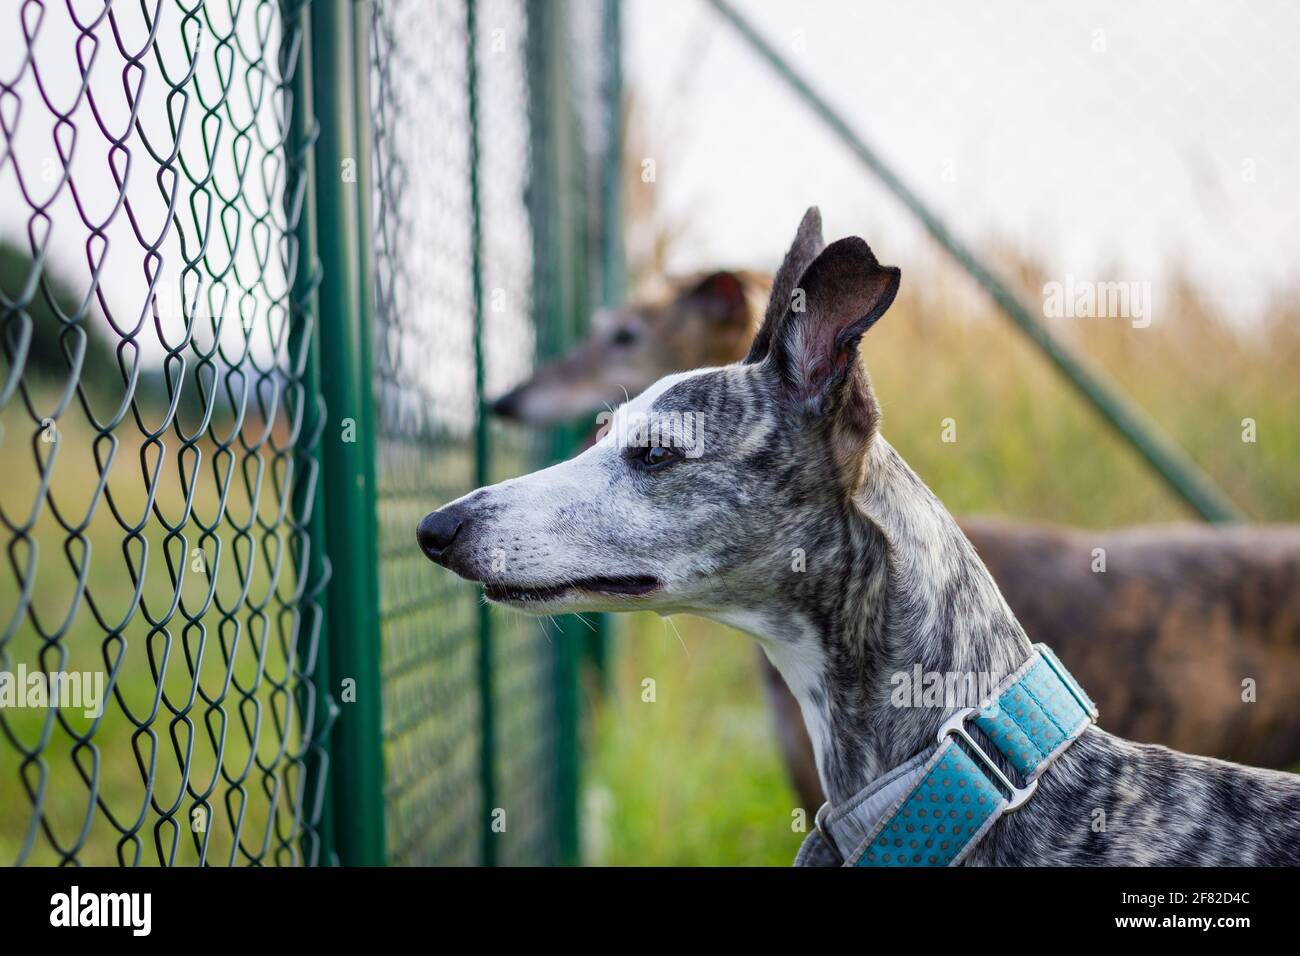 Beware of dog. Two dogs guarding backyard behind chain link fence. Whippet and spanish greyhound outdoors Stock Photo